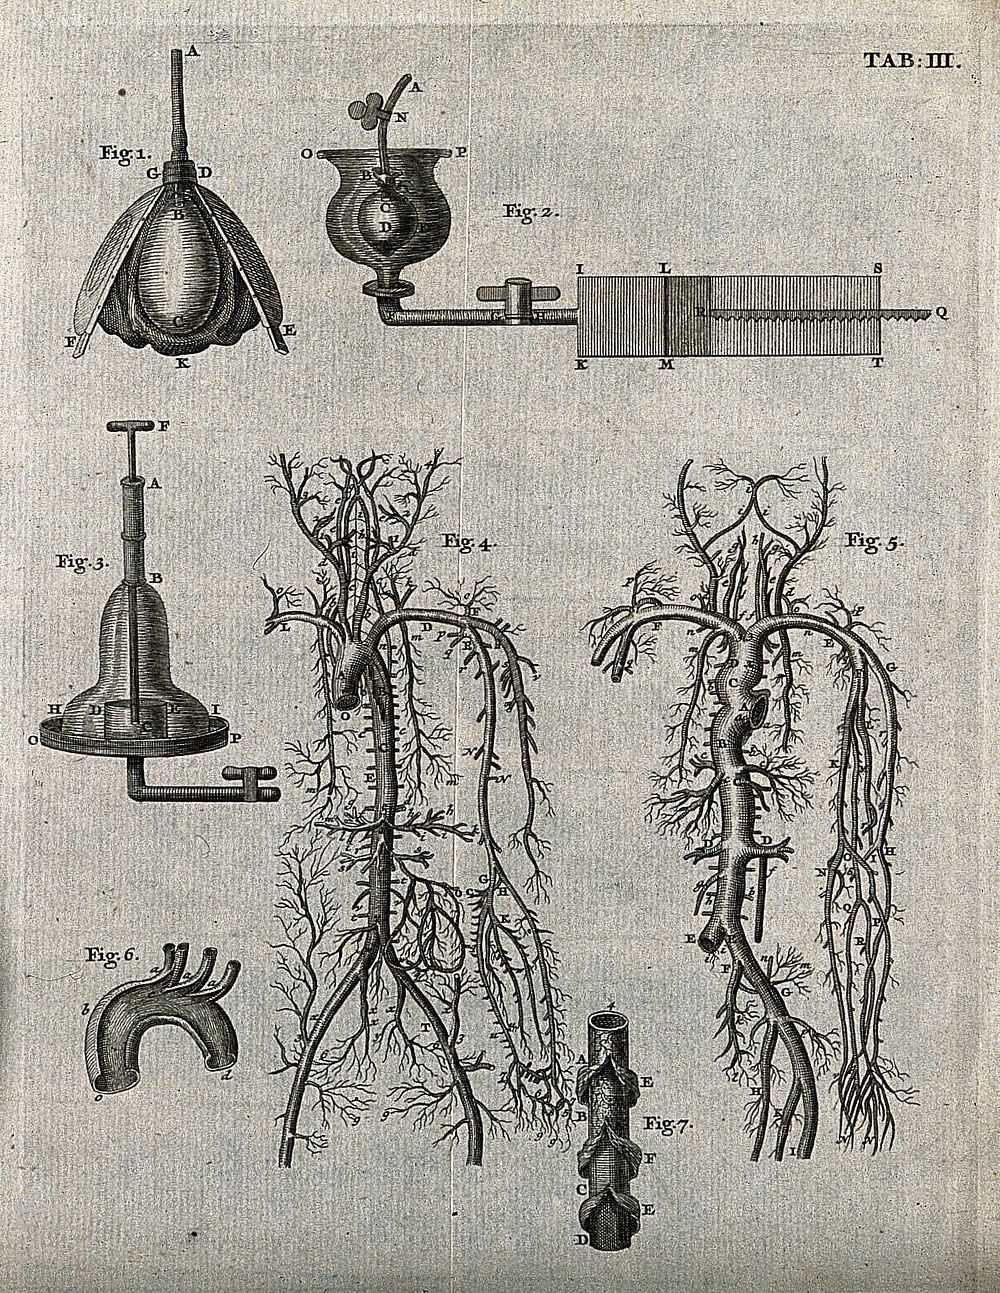 The venous and arterial system (figs 4-5), seen with a bellows and two other mechanical devices (figs 1-2). Engraving, 18th…